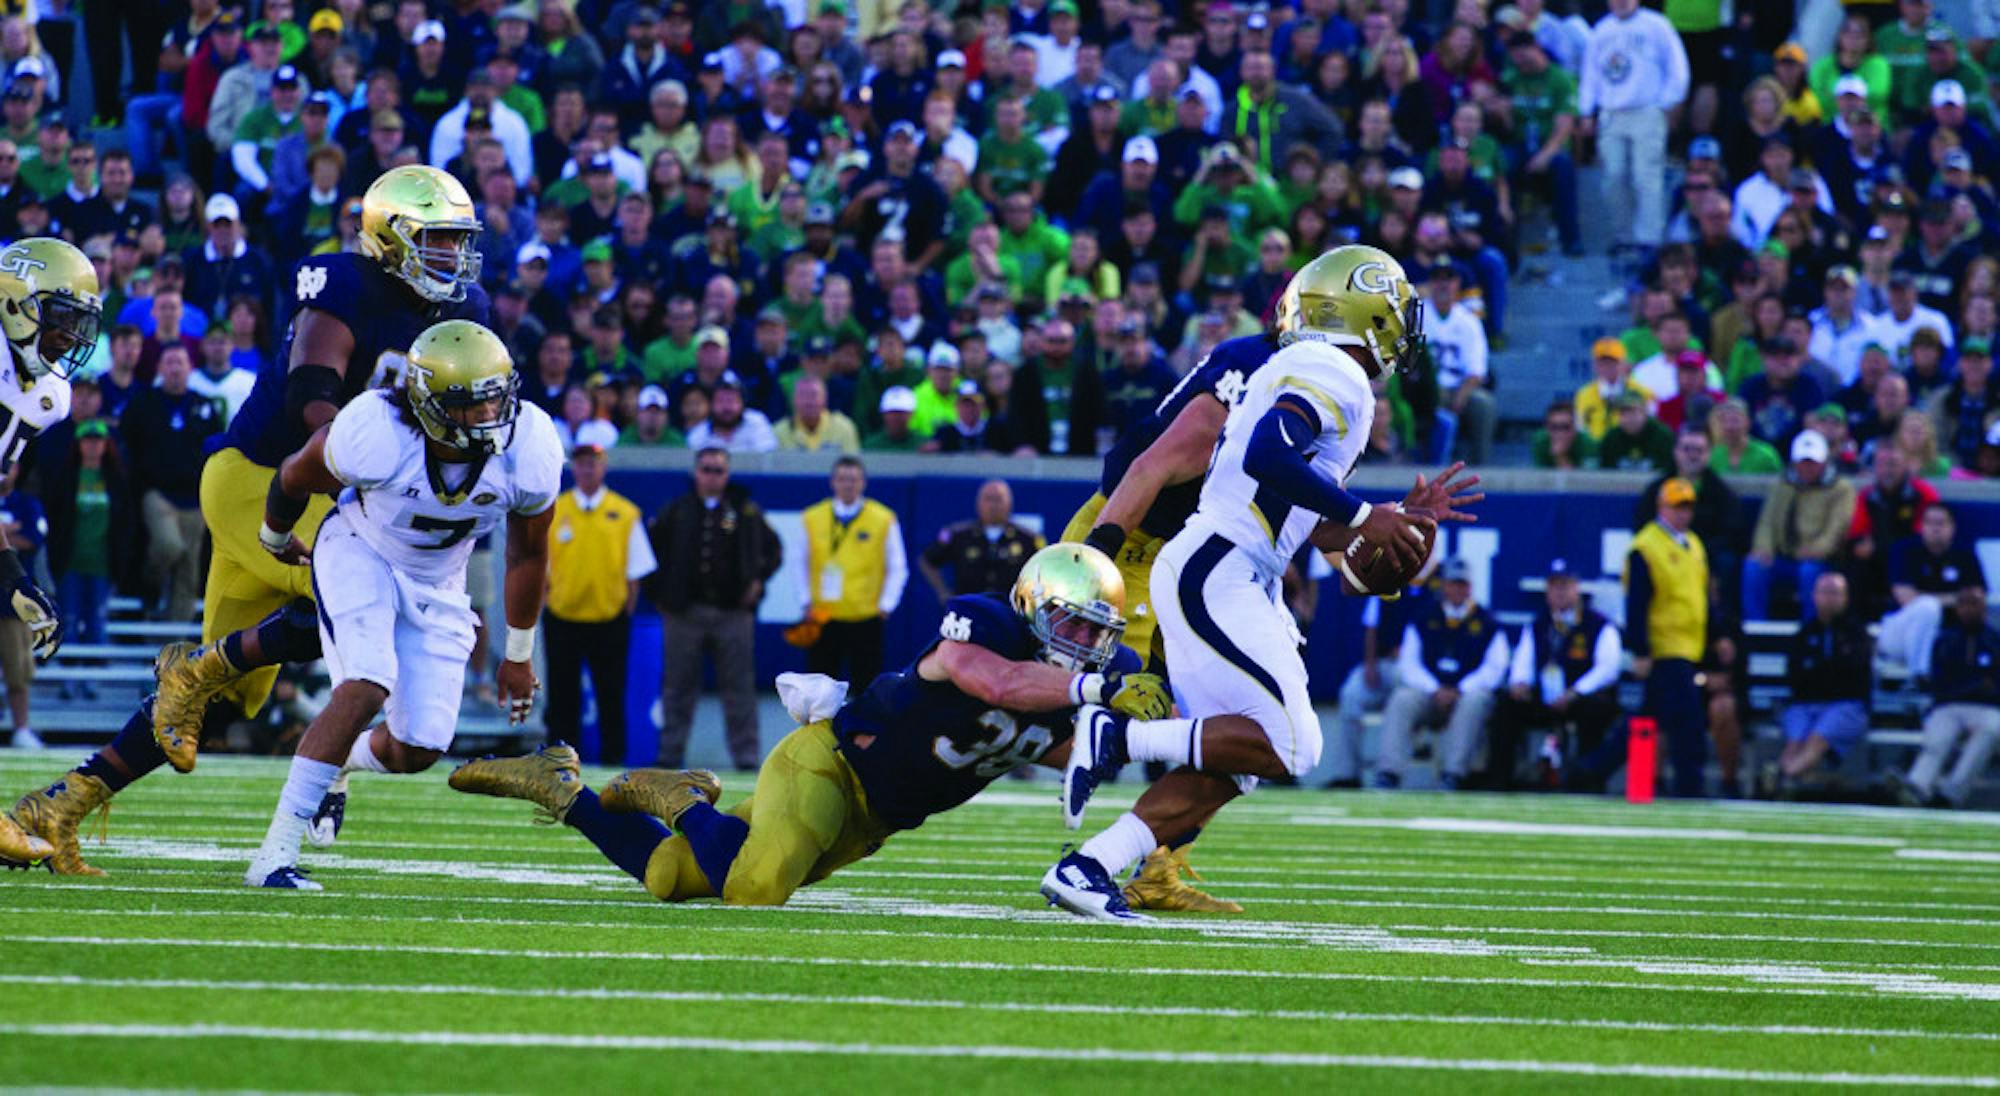 Irish graduate student linebacker Joe Schmidt, right, dives in an attempt to tackle Georgia Tech redshirt junior quarterback Justin Thomas during Notre Dame’s 30-22 win at Notre Dame Stadium on Saturday. Schmidt led the Irish defense with 10 tackles, including two for a loss.